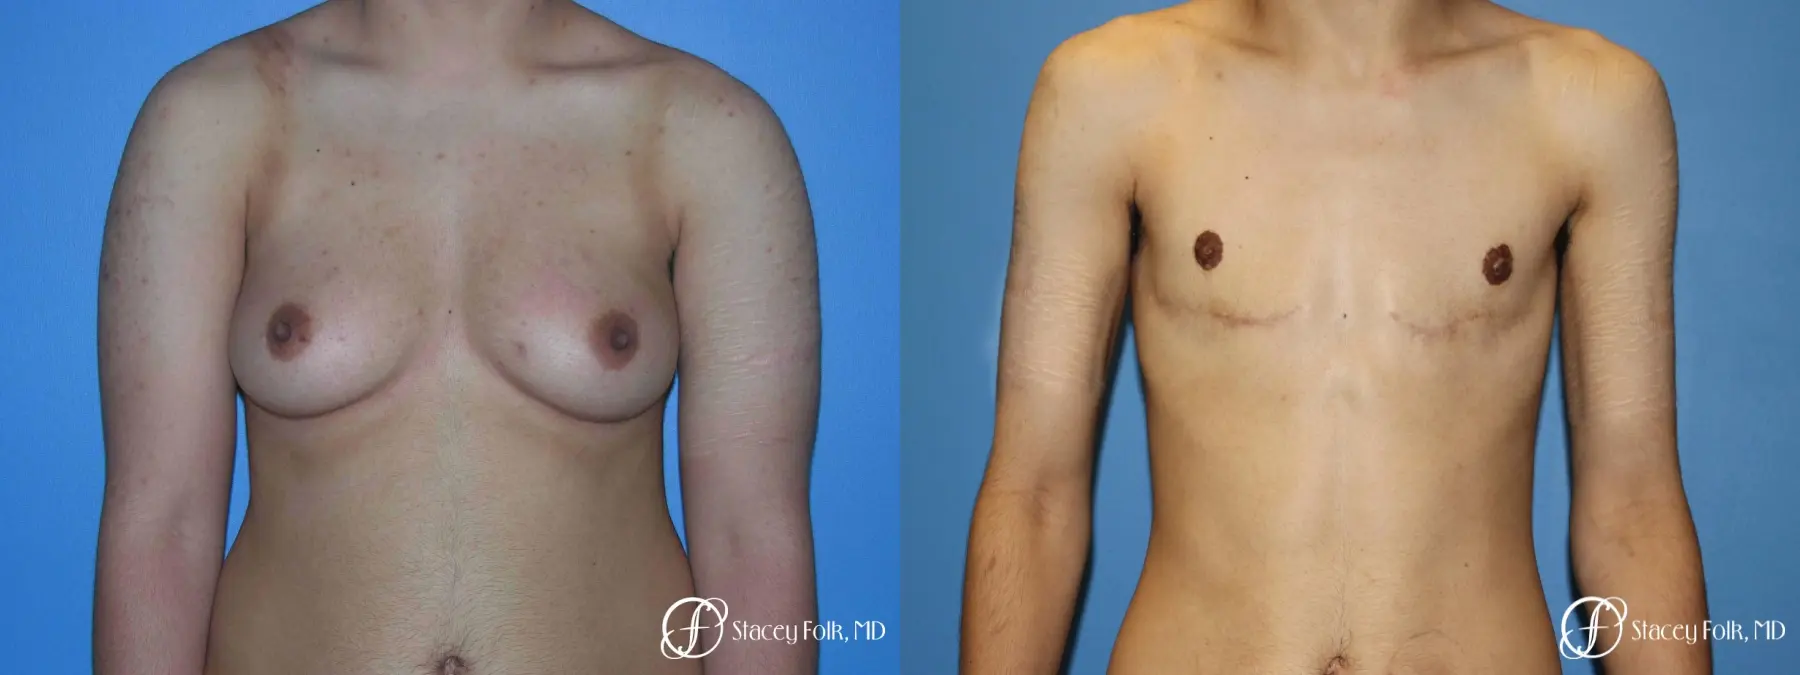 Denver FTM Female to male top surgery 5105 - Before and After